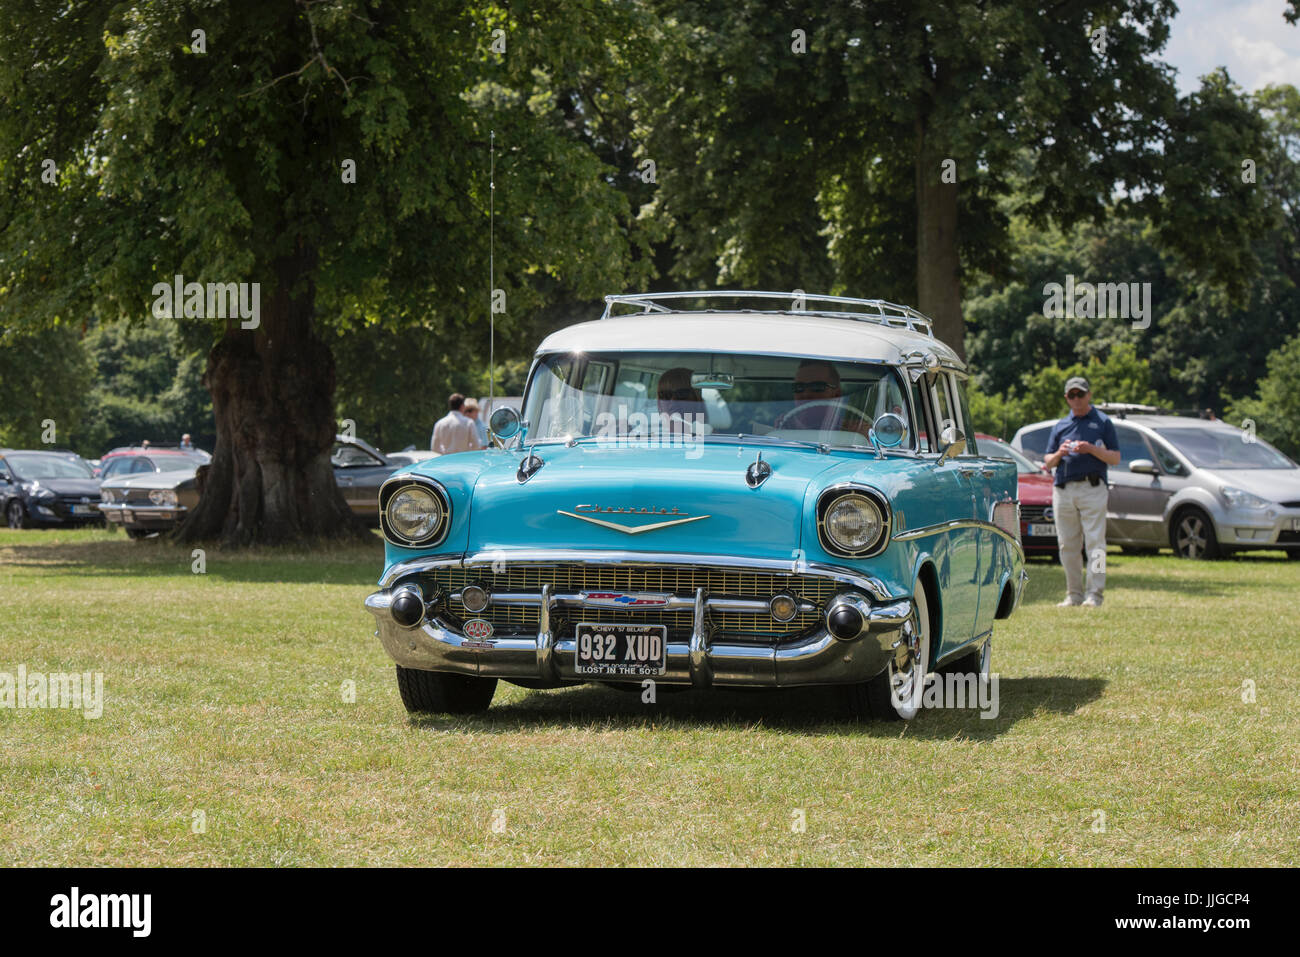 1957 Chevrolet Bel Air station wagon  at Rally of the Giants american car show, Blenheim palace, Oxfordshire, England. Classic vintage American car Stock Photo